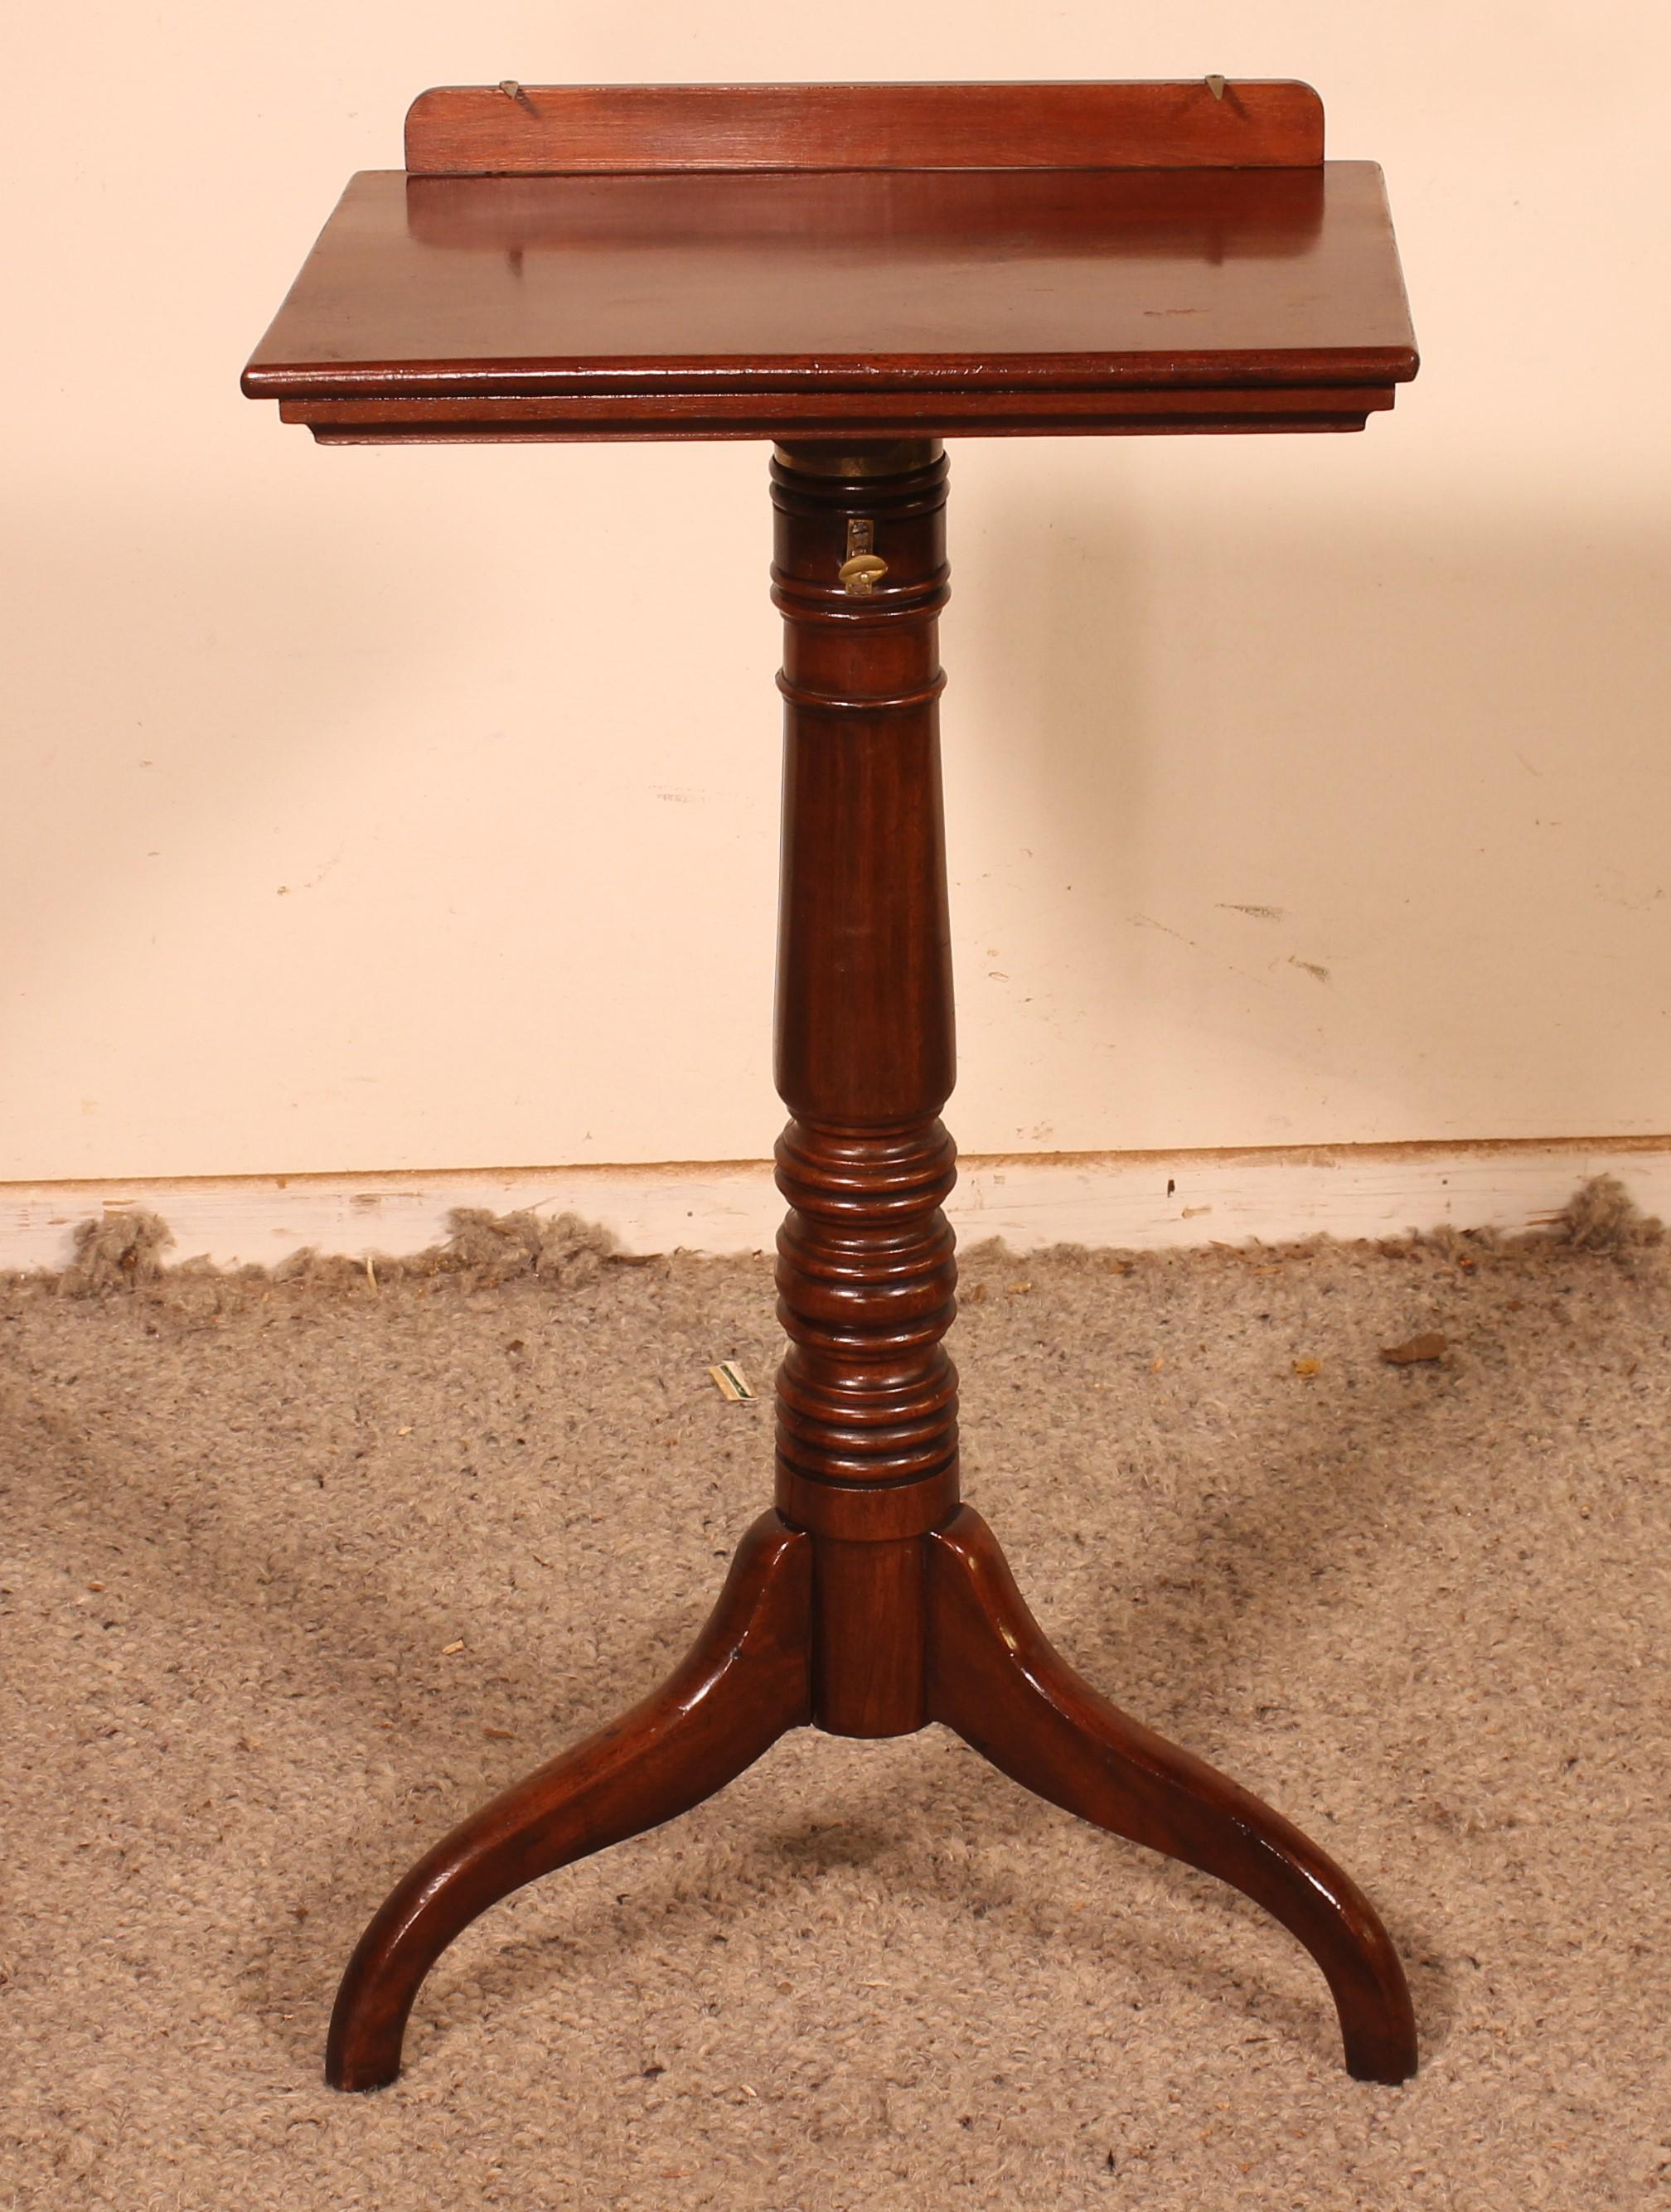 Lovely mahogany lectern from the 19th century from England
Very nice lectern with a beautiful turning ending in a tripod base
Tiltable top at different angles (see picture) with removable music stand stick. This allows it to be used as a small